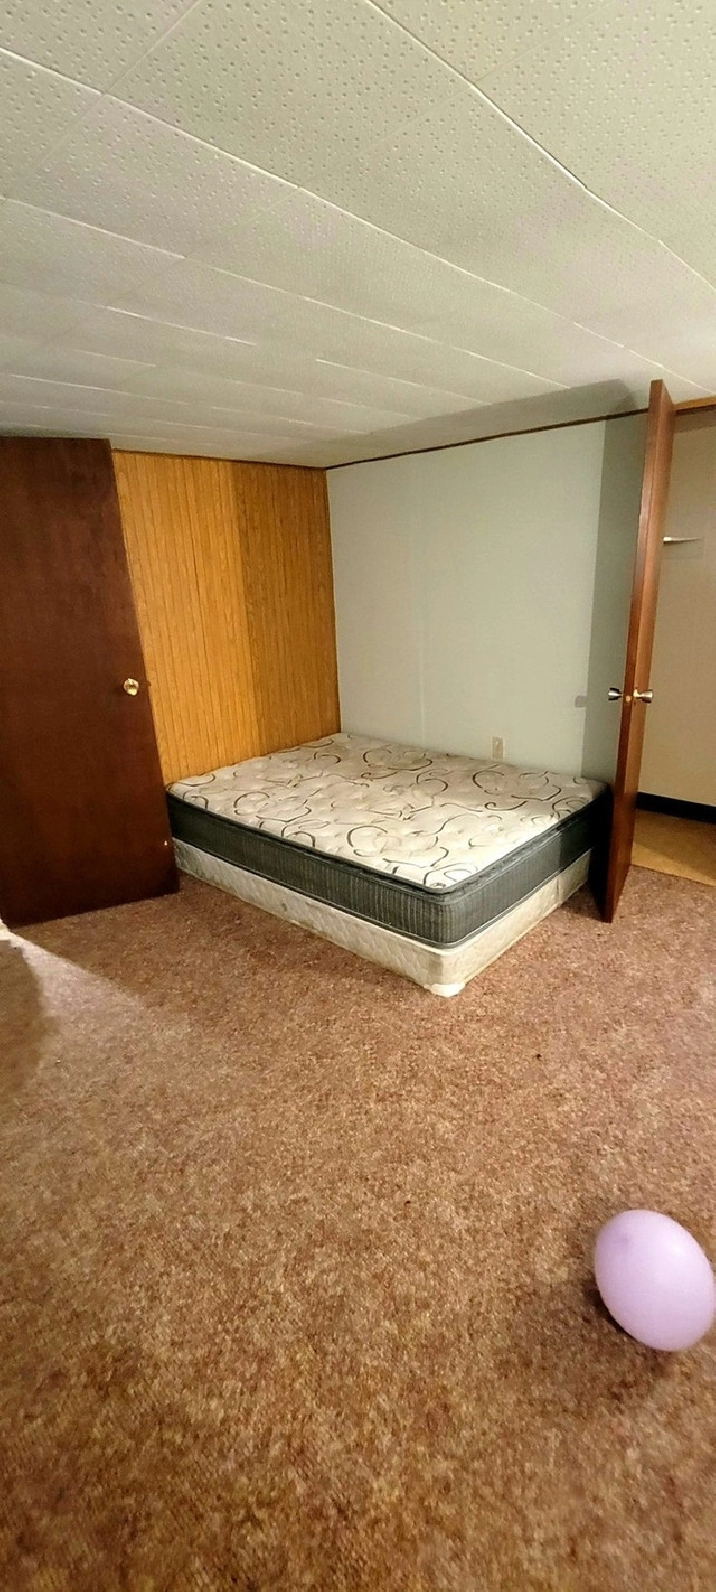 basement for rent 975 all included from 1st august in regina,sk - room rentals & roommates